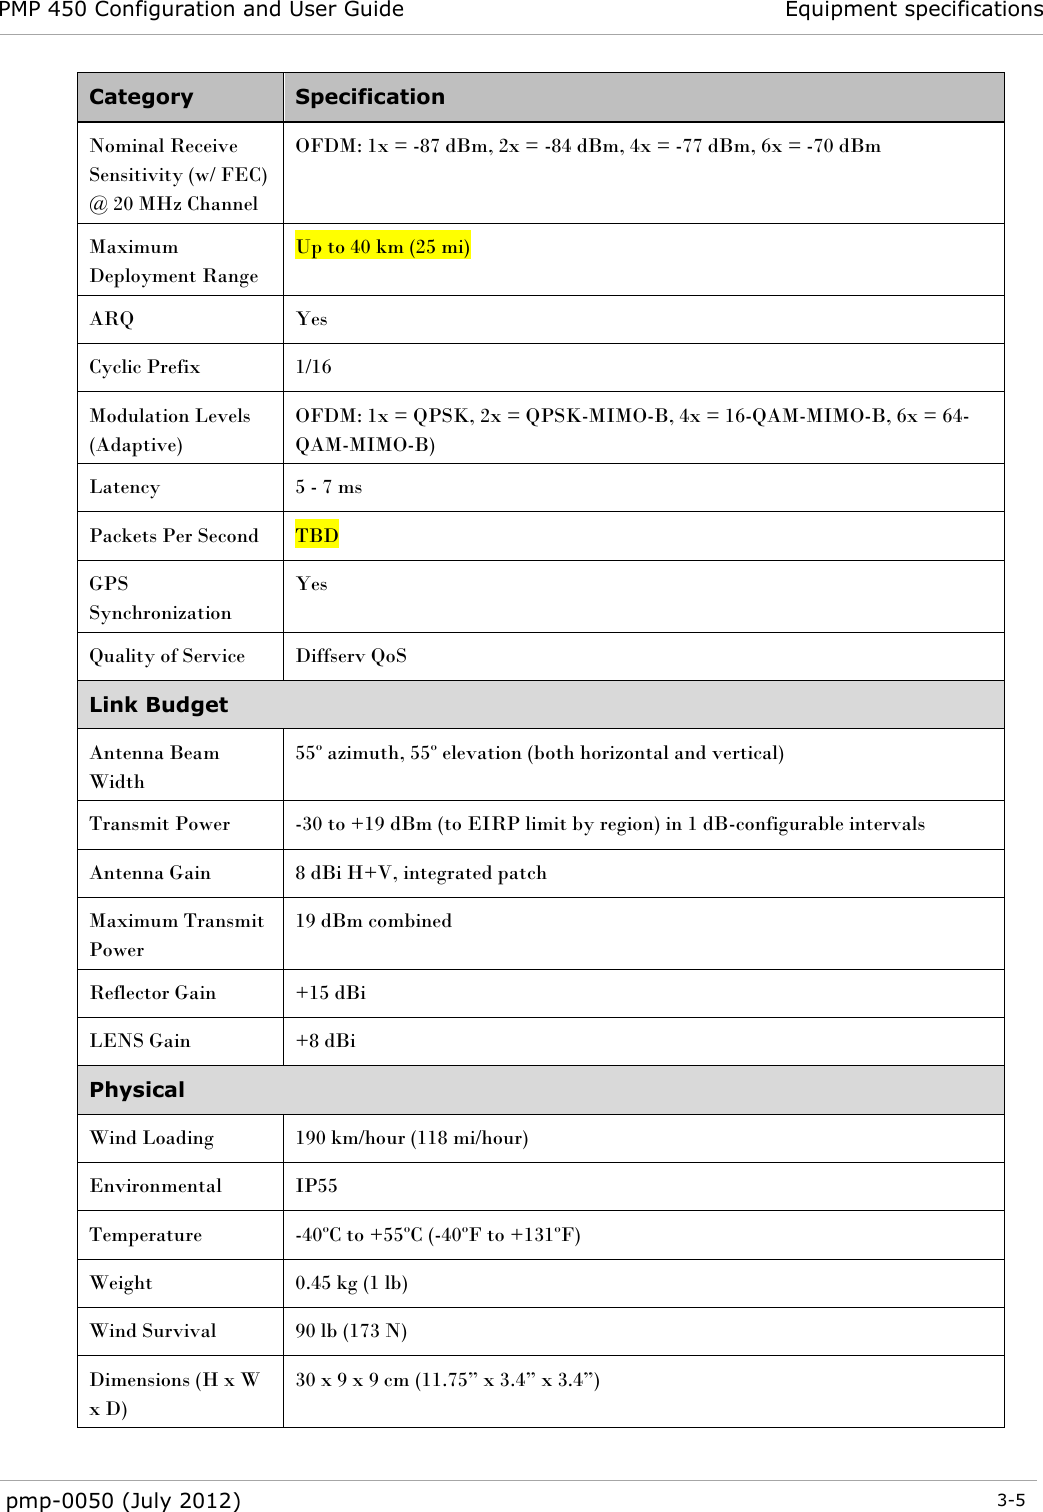 PMP 450 Configuration and User Guide Equipment specifications  pmp-0050 (July 2012)  3-5  Category Specification Nominal Receive Sensitivity (w/ FEC) @ 20 MHz Channel OFDM: 1x = -87 dBm, 2x = -84 dBm, 4x = -77 dBm, 6x = -70 dBm Maximum Deployment Range Up to 40 km (25 mi) ARQ Yes Cyclic Prefix 1/16 Modulation Levels (Adaptive) OFDM: 1x = QPSK, 2x = QPSK-MIMO-B, 4x = 16-QAM-MIMO-B, 6x = 64-QAM-MIMO-B) Latency 5 - 7 ms Packets Per Second TBD GPS Synchronization Yes Quality of Service Diffserv QoS Link Budget Antenna Beam Width 55º azimuth, 55º elevation (both horizontal and vertical) Transmit Power -30 to +19 dBm (to EIRP limit by region) in 1 dB-configurable intervals Antenna Gain 8 dBi H+V, integrated patch Maximum Transmit Power 19 dBm combined Reflector Gain +15 dBi LENS Gain +8 dBi Physical Wind Loading 190 km/hour (118 mi/hour) Environmental IP55 Temperature -40ºC to +55ºC (-40ºF to +131ºF) Weight 0.45 kg (1 lb) Wind Survival 90 lb (173 N) Dimensions (H x W x D) 30 x 9 x 9 cm (11.75‖ x 3.4‖ x 3.4‖) 